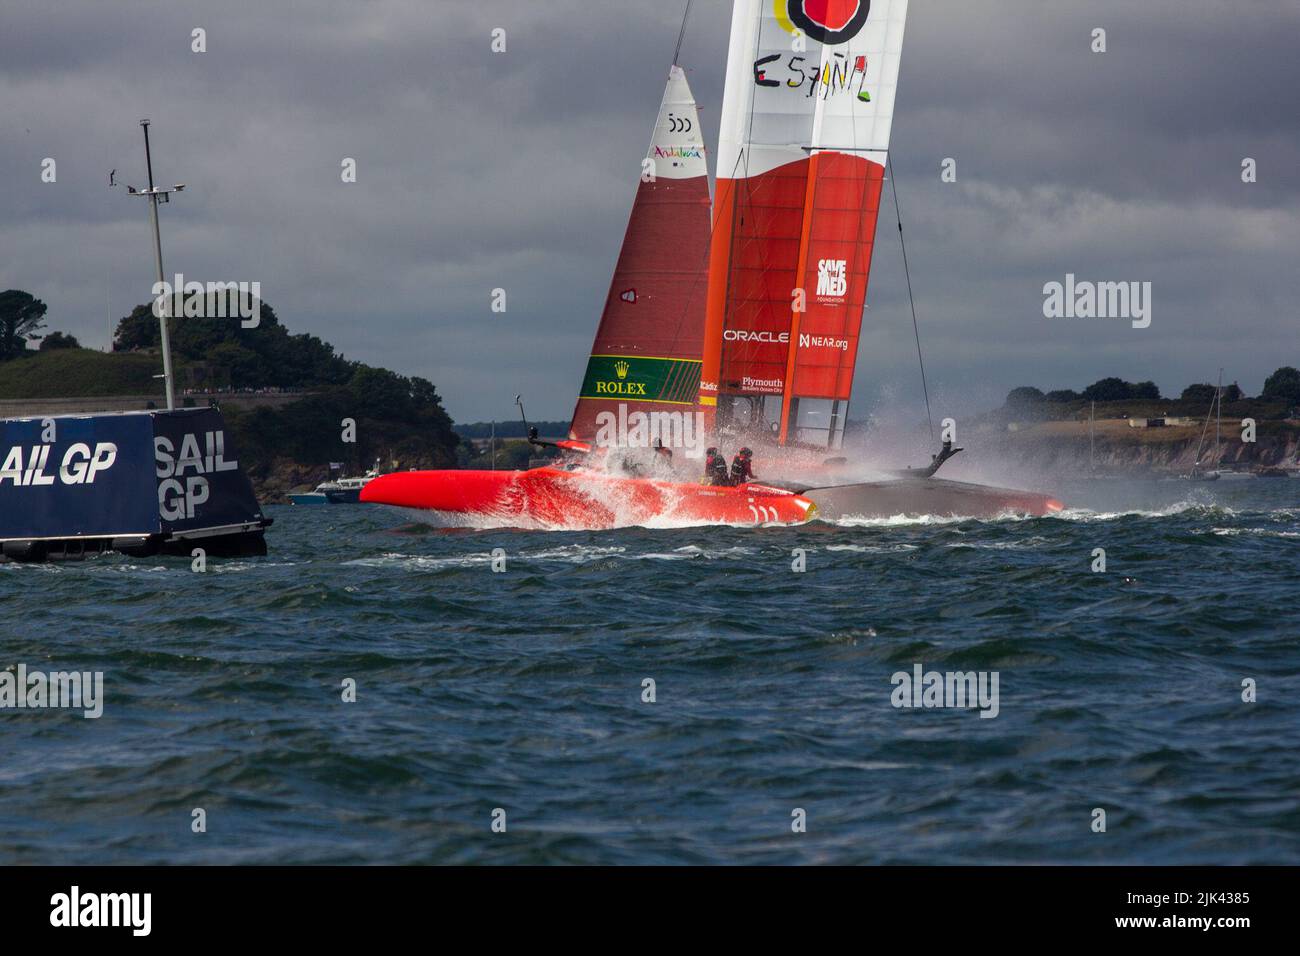 SailGP, Plymouth, UK. 30th July, 2022. Spain Dives into the water! Day 1 for the Great British Sail Grand Prix, as Britain's Ocean City hosts the third event of Season 3 as the most competitive racing on water. The event returns to Plymouth on 30-31 July. Credit: Julian Kemp/Alamy Live News Stock Photo